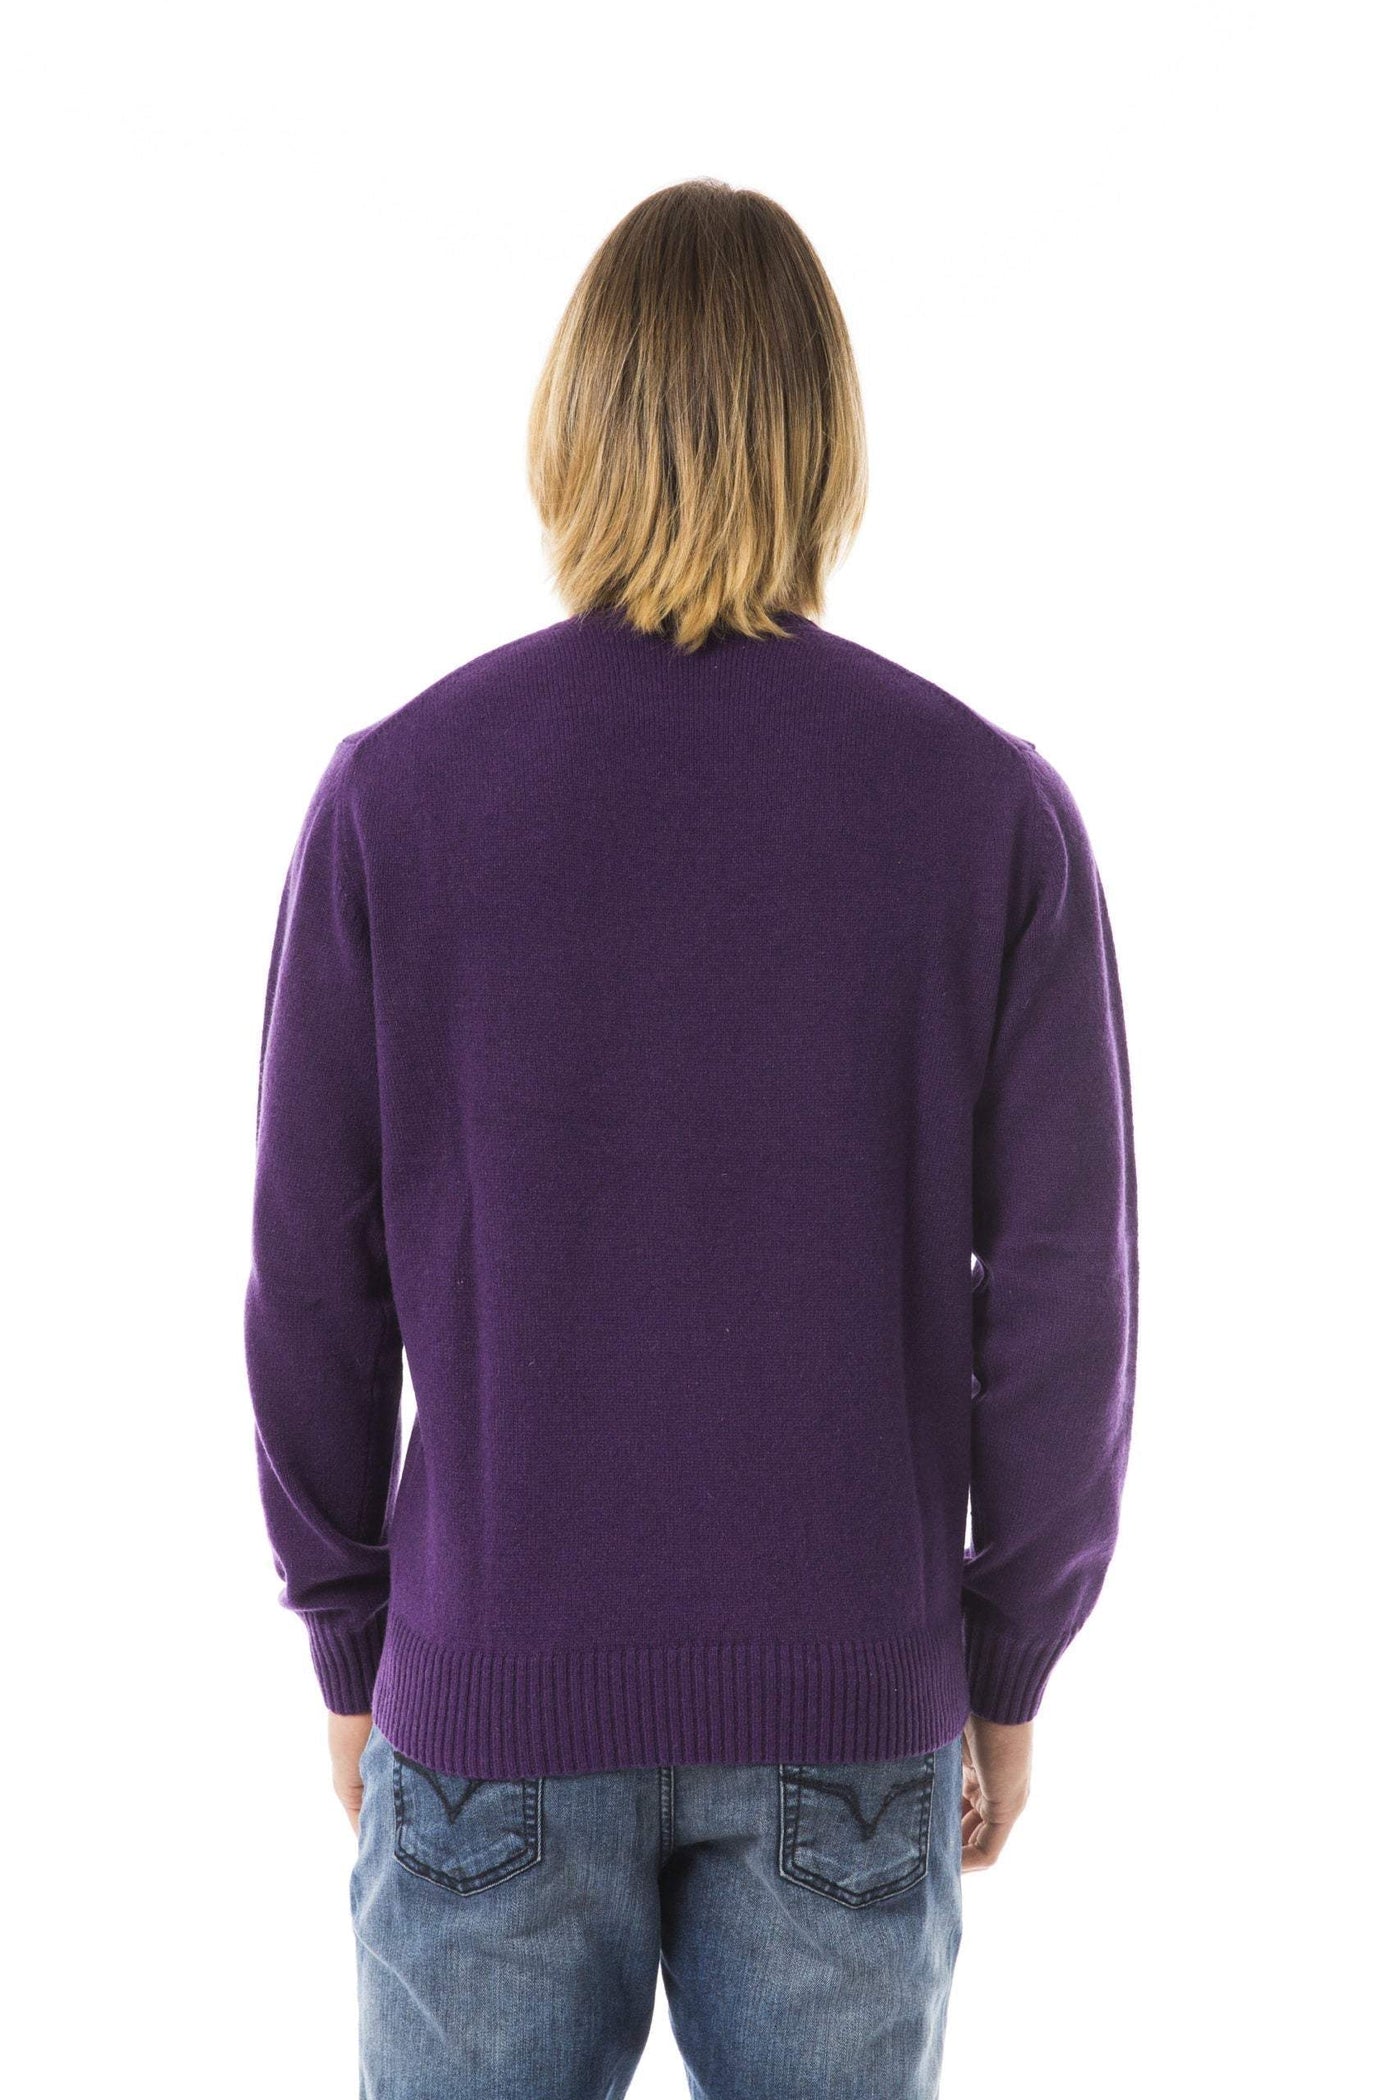 Uominitaliani emboidered crew neck Sweater #men, feed-color-Violet, feed-gender-adult, feed-gender-male, L, Sweaters - Men - Clothing, Uominitaliani, Violet at SEYMAYKA